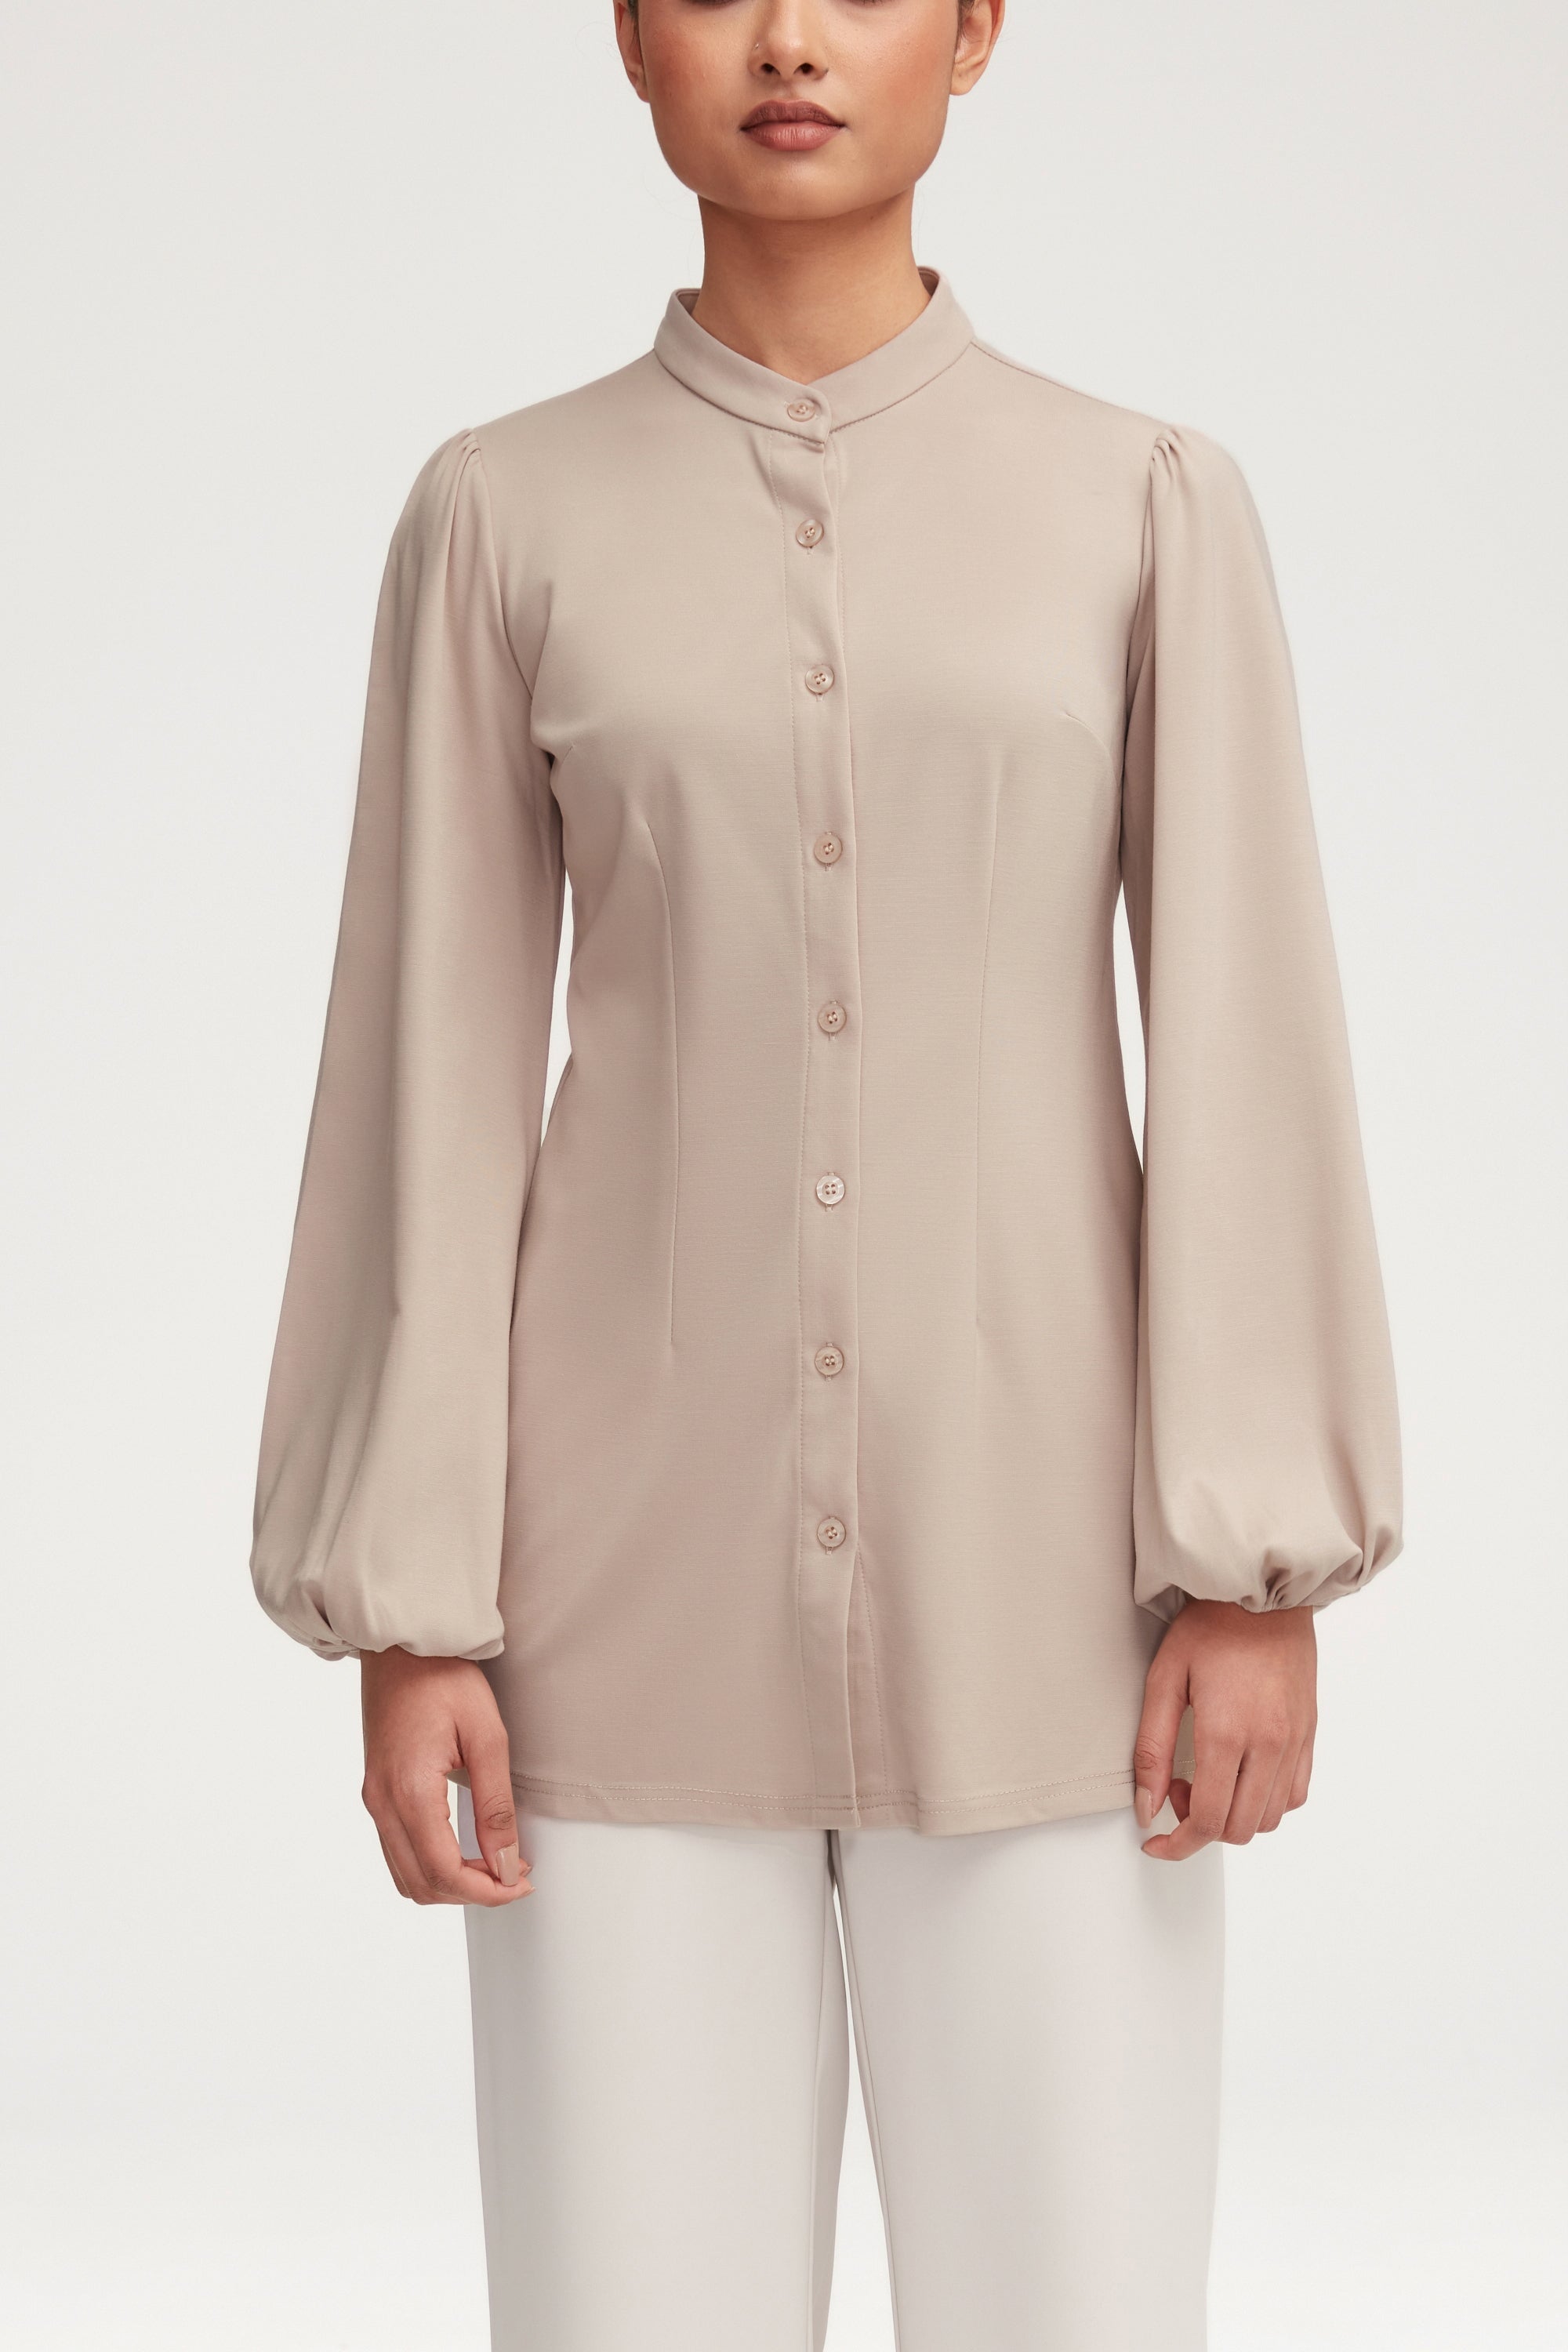 Rayana Jersey Button Down Top - Stone Clothing Veiled 